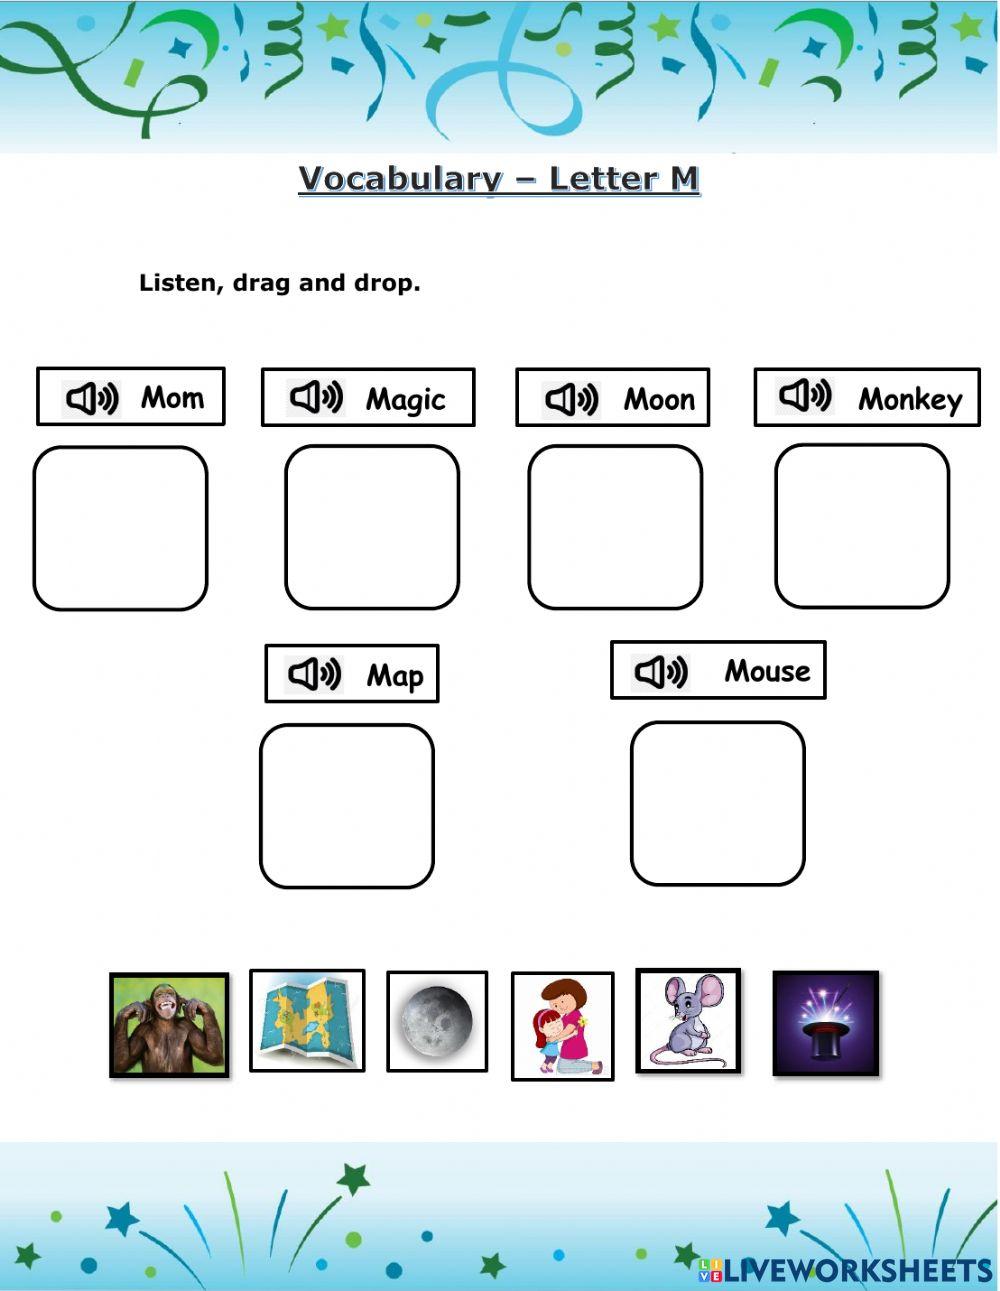 Vocabulary-Letters M, S and D